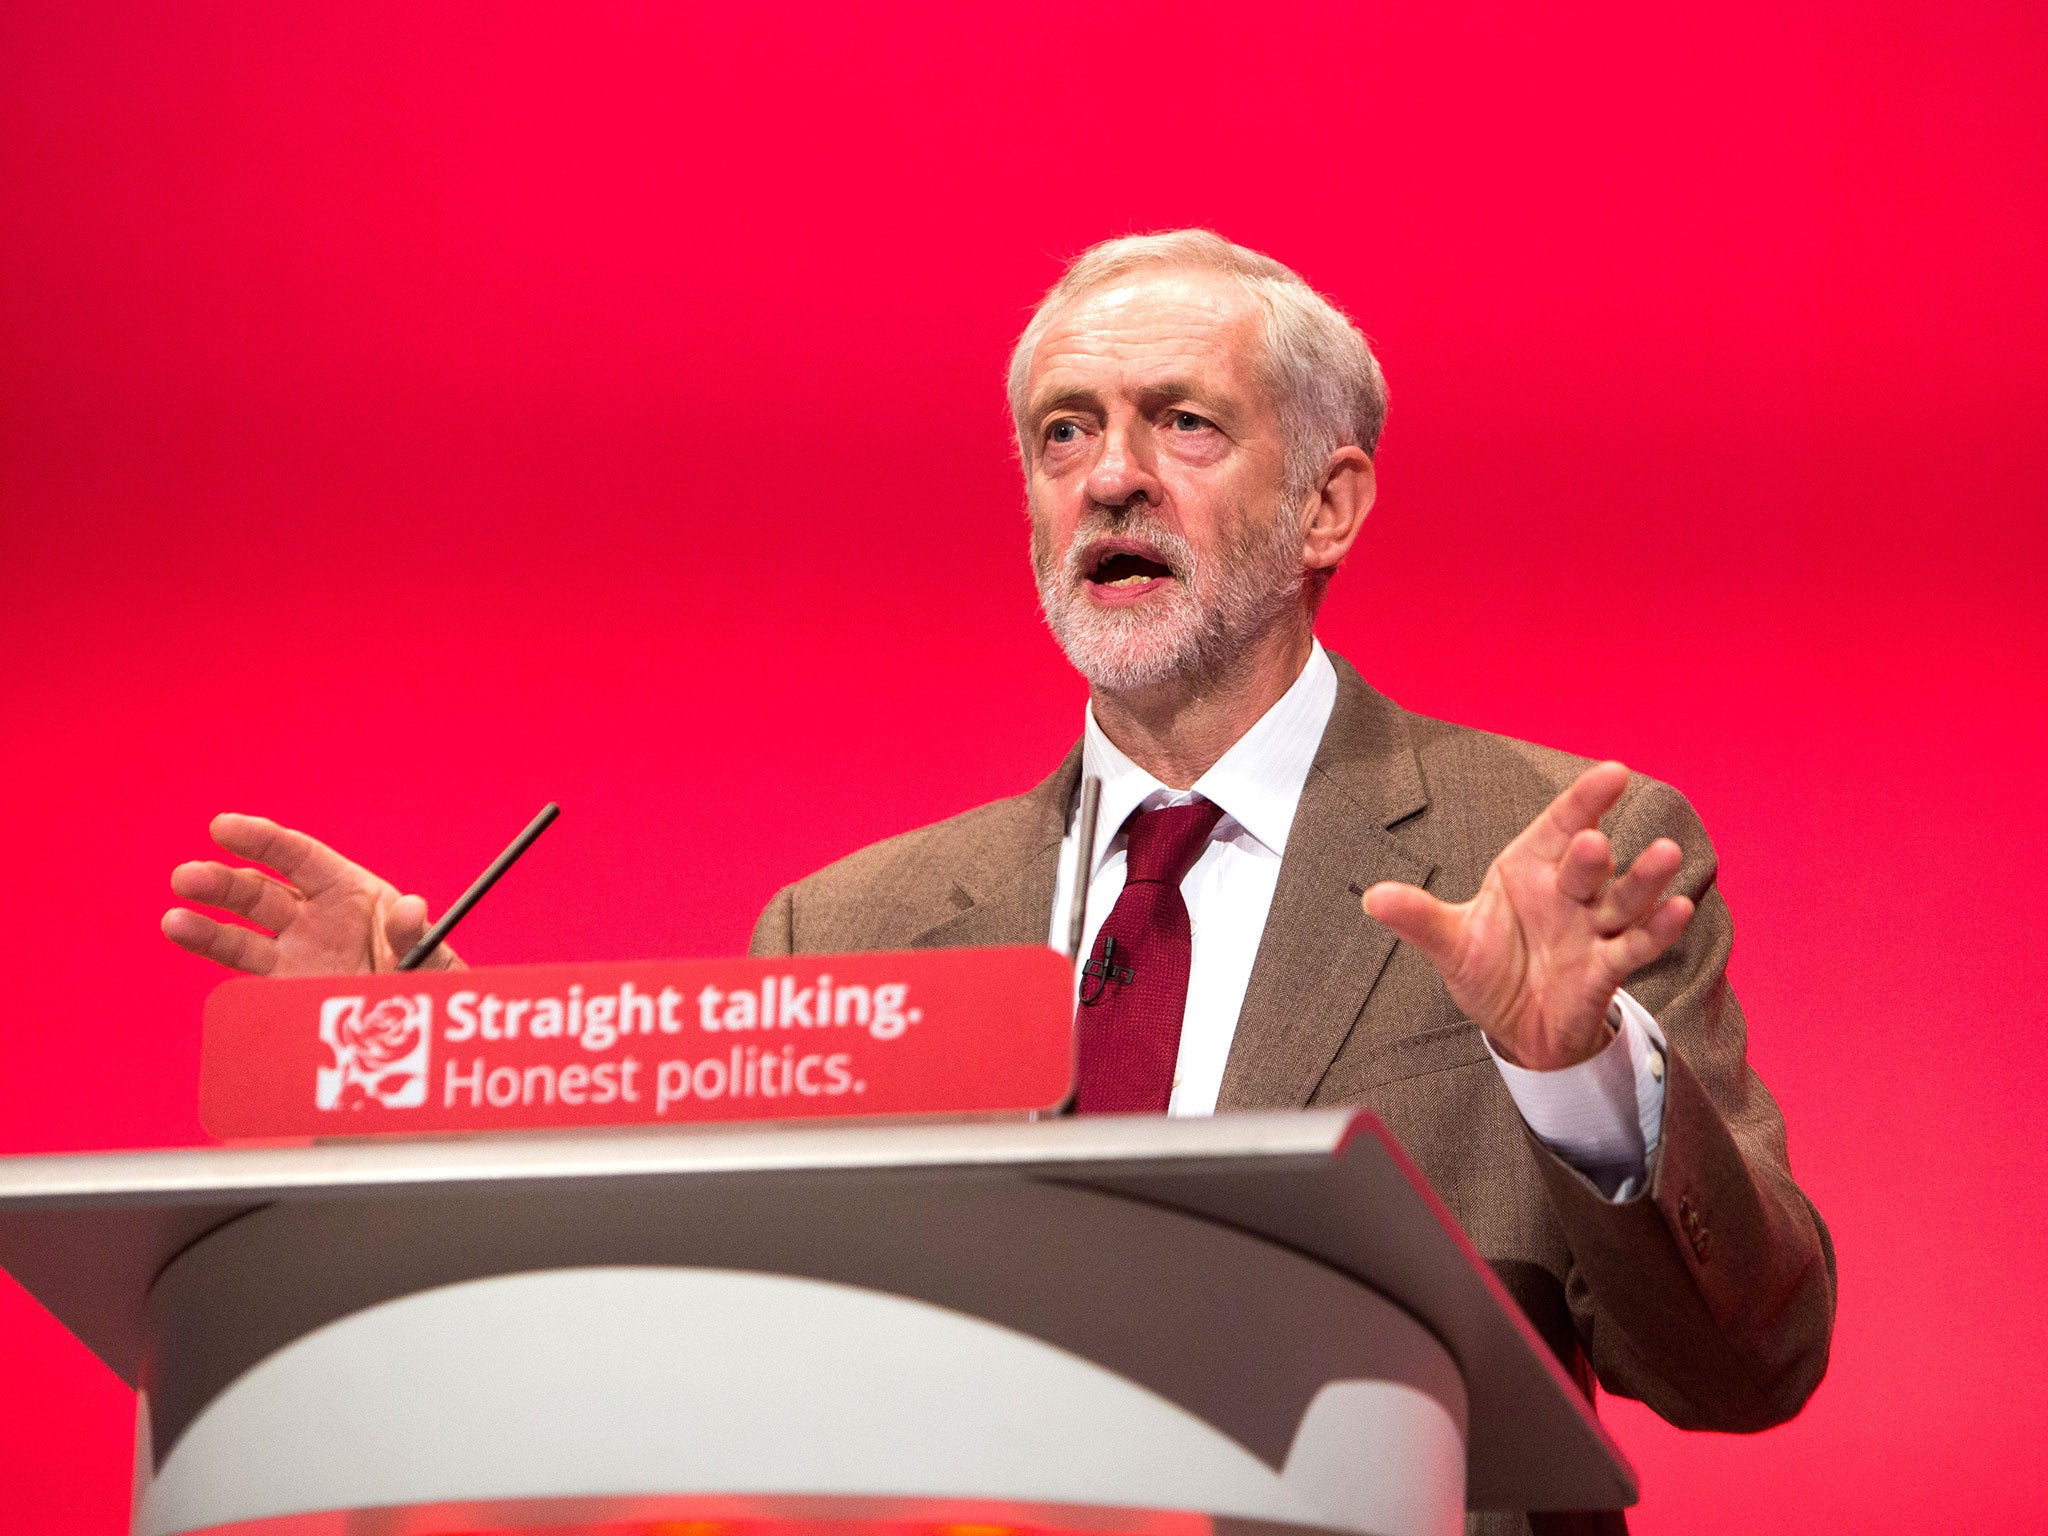 Jeremy Corbyn speaking at the Labour Party Annual Conference in Brighton in September